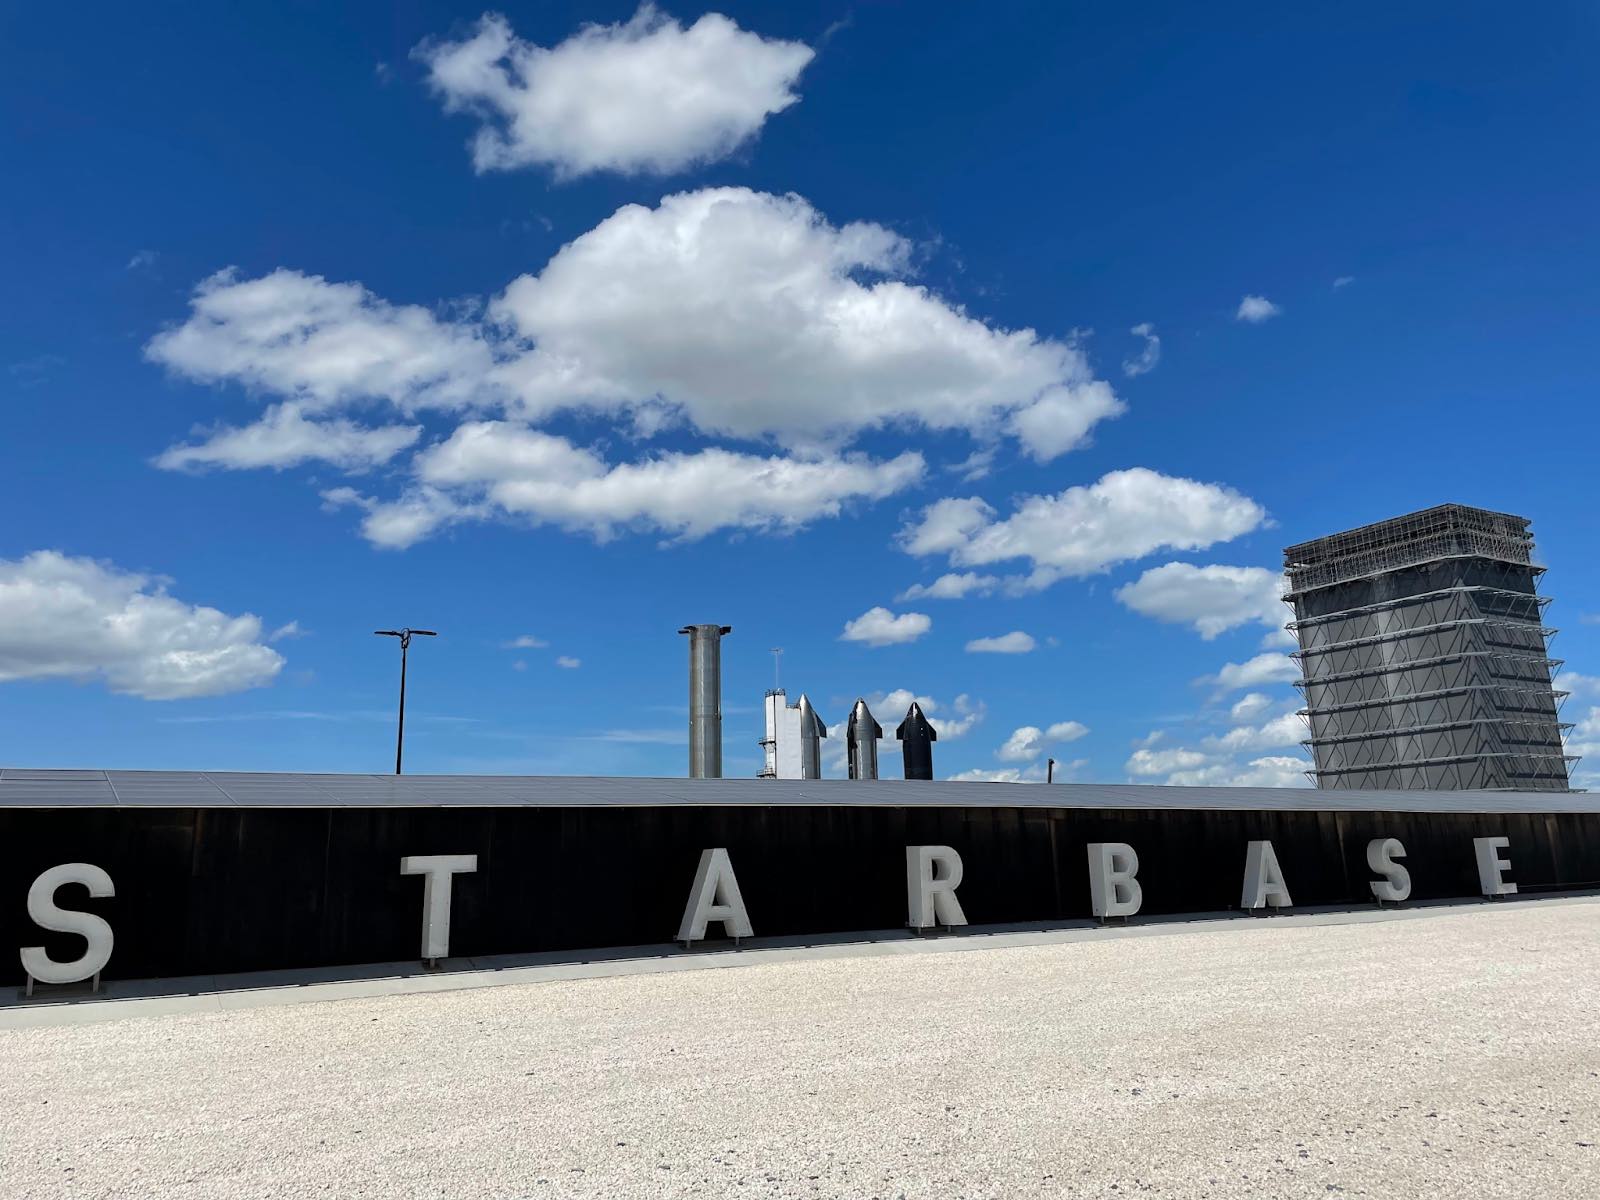 The official "Starbase" sign near SpaceX's Sanchez site with rockets visible in the background.